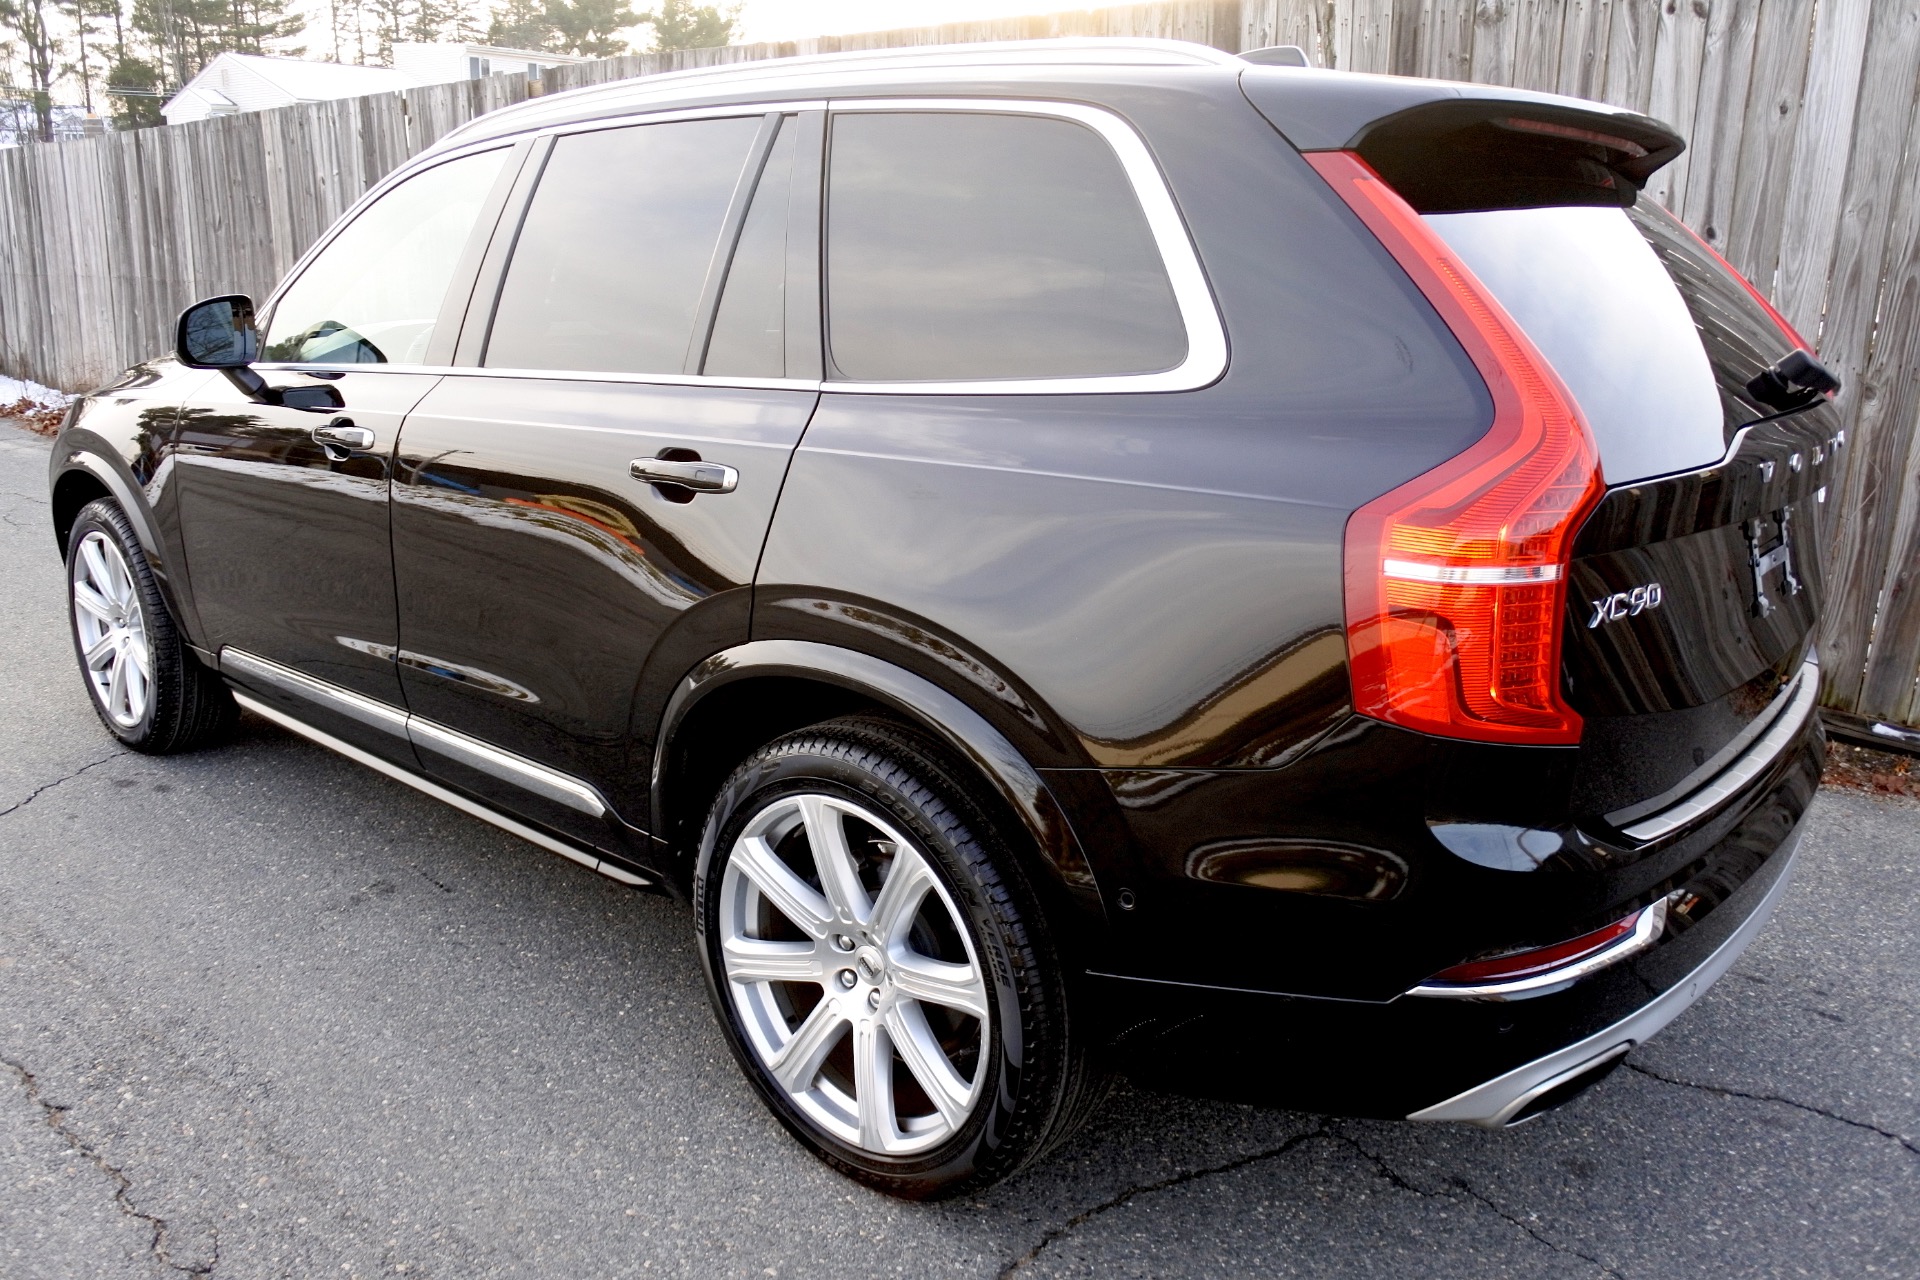 Used 2016 Volvo Xc90 T6 Inscription AWD For Sale 24 800 Metro West Motorcars LLC Stock 073355